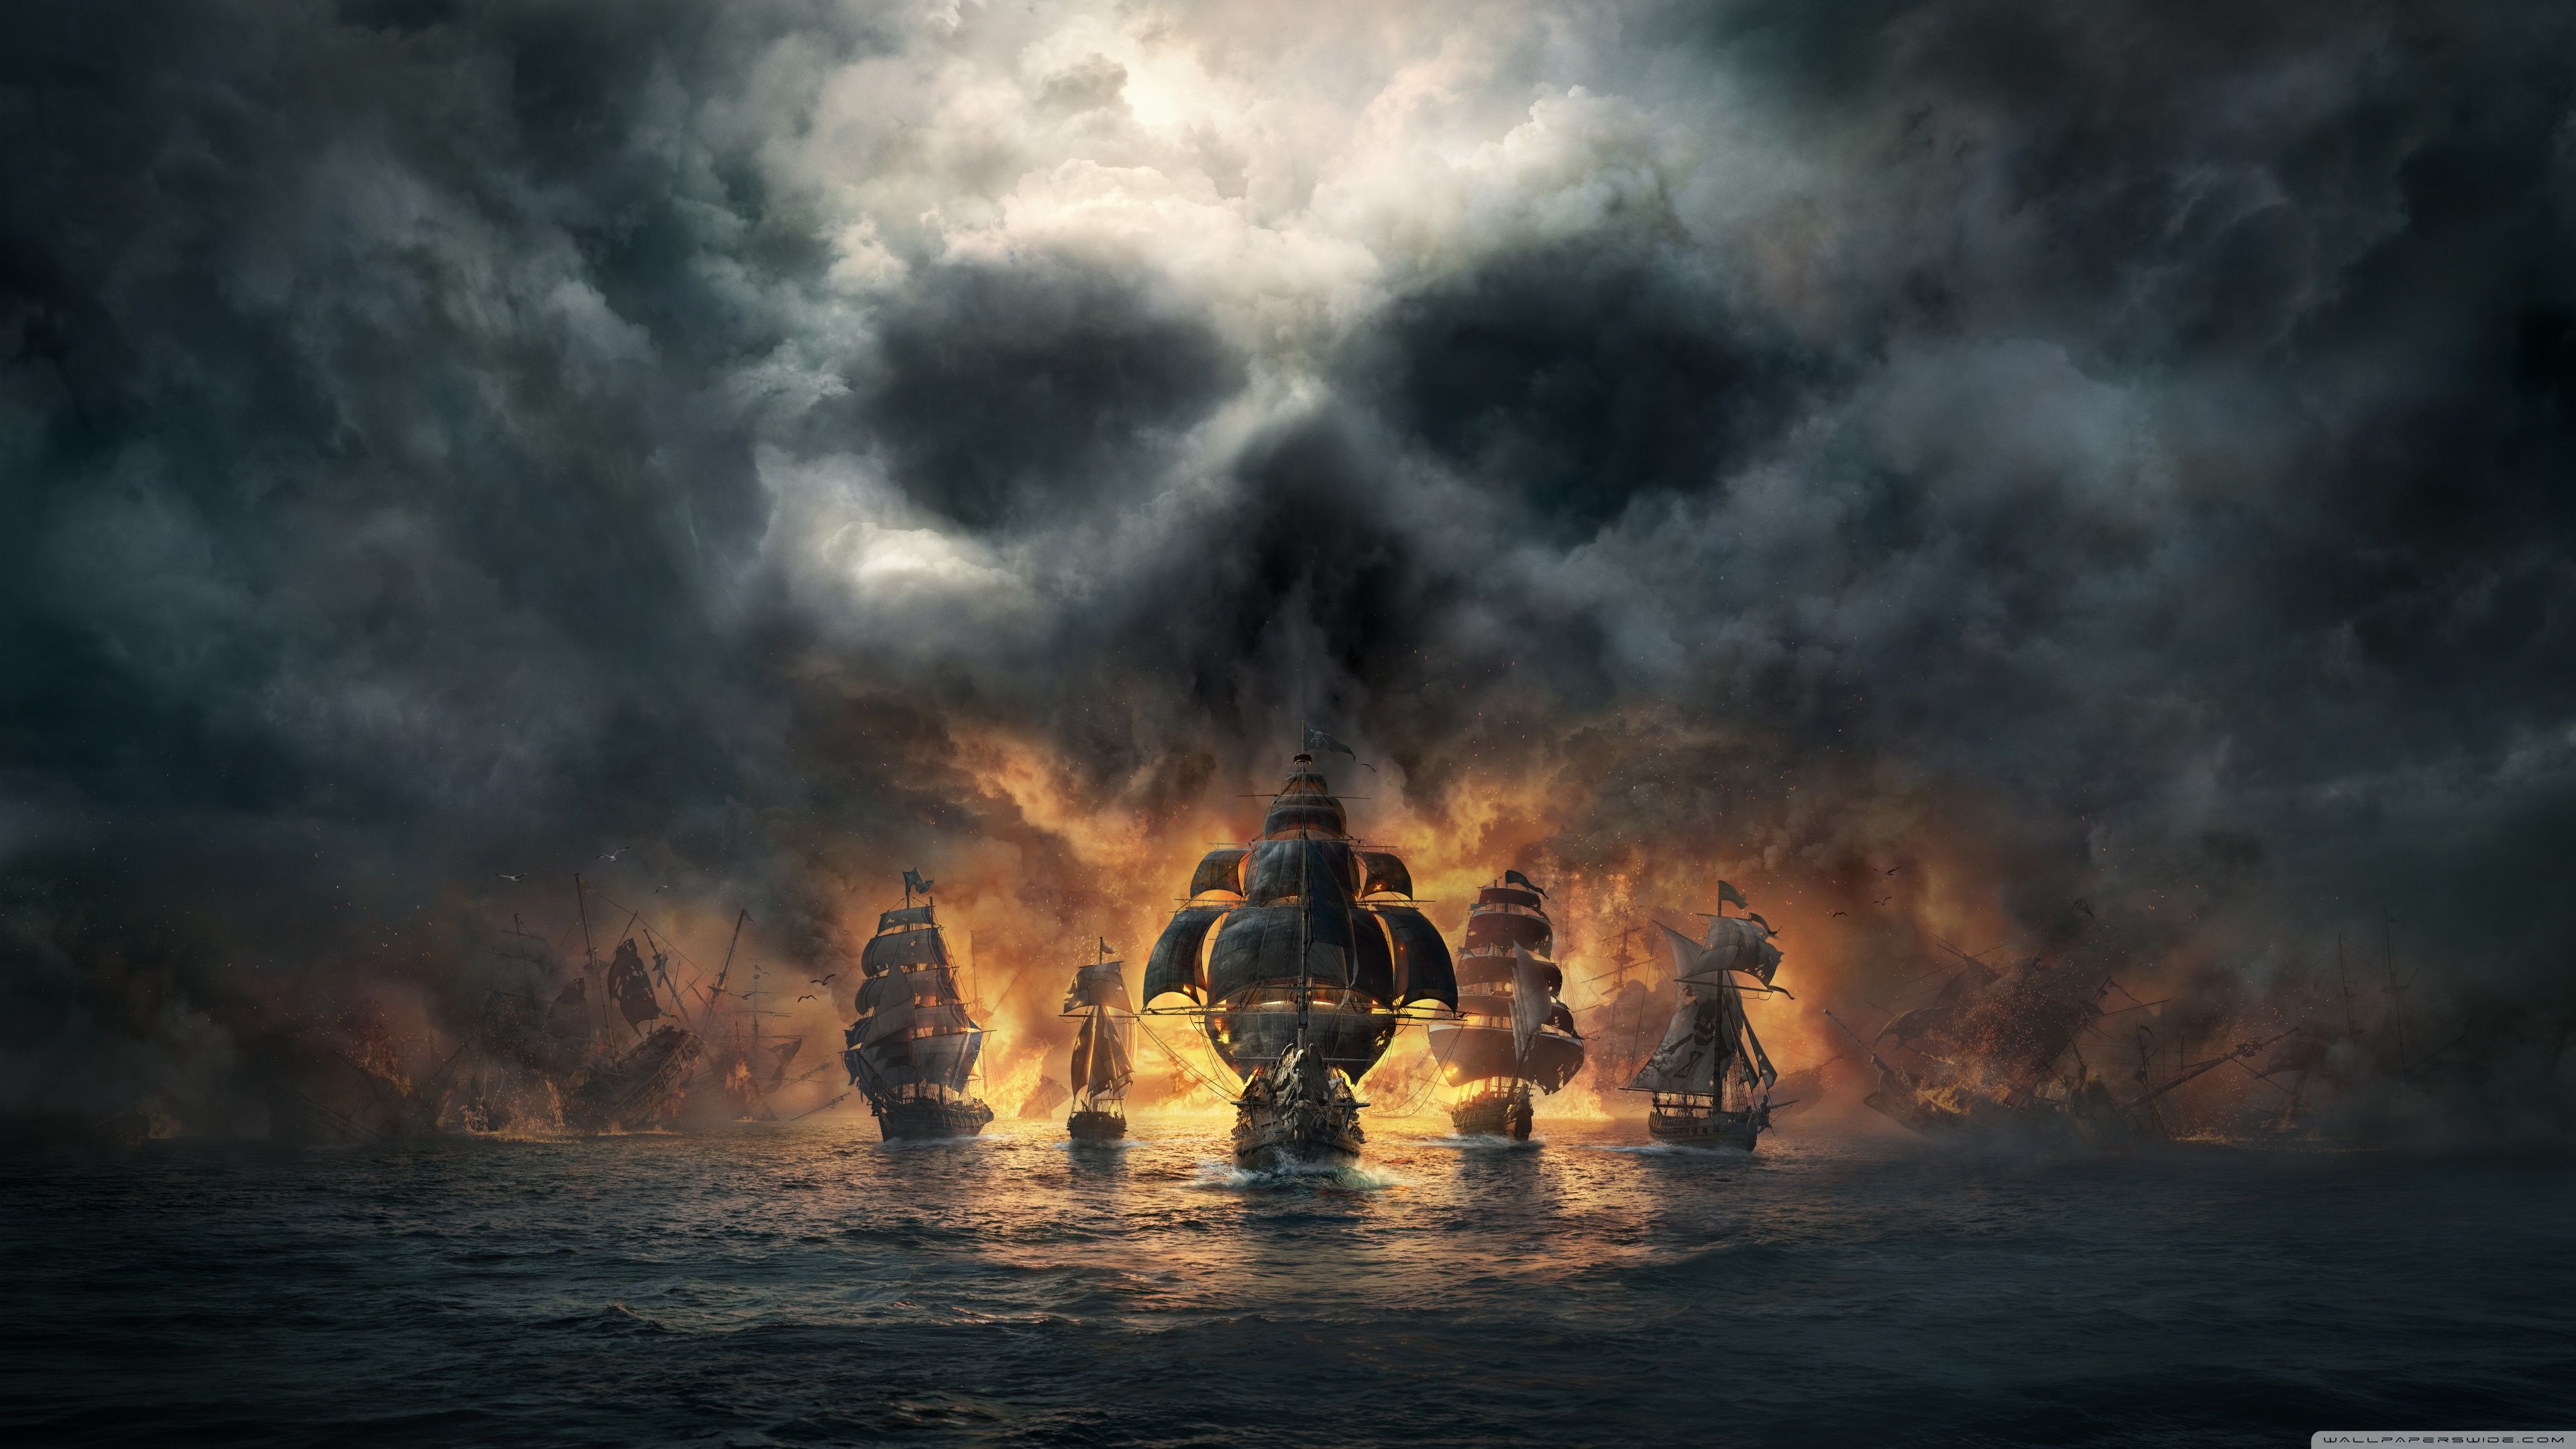 skull and bones 2018 video game wallpaper 3840×2160. HD Wallpaper, HD Background, Tumblr Background, Image, Picture